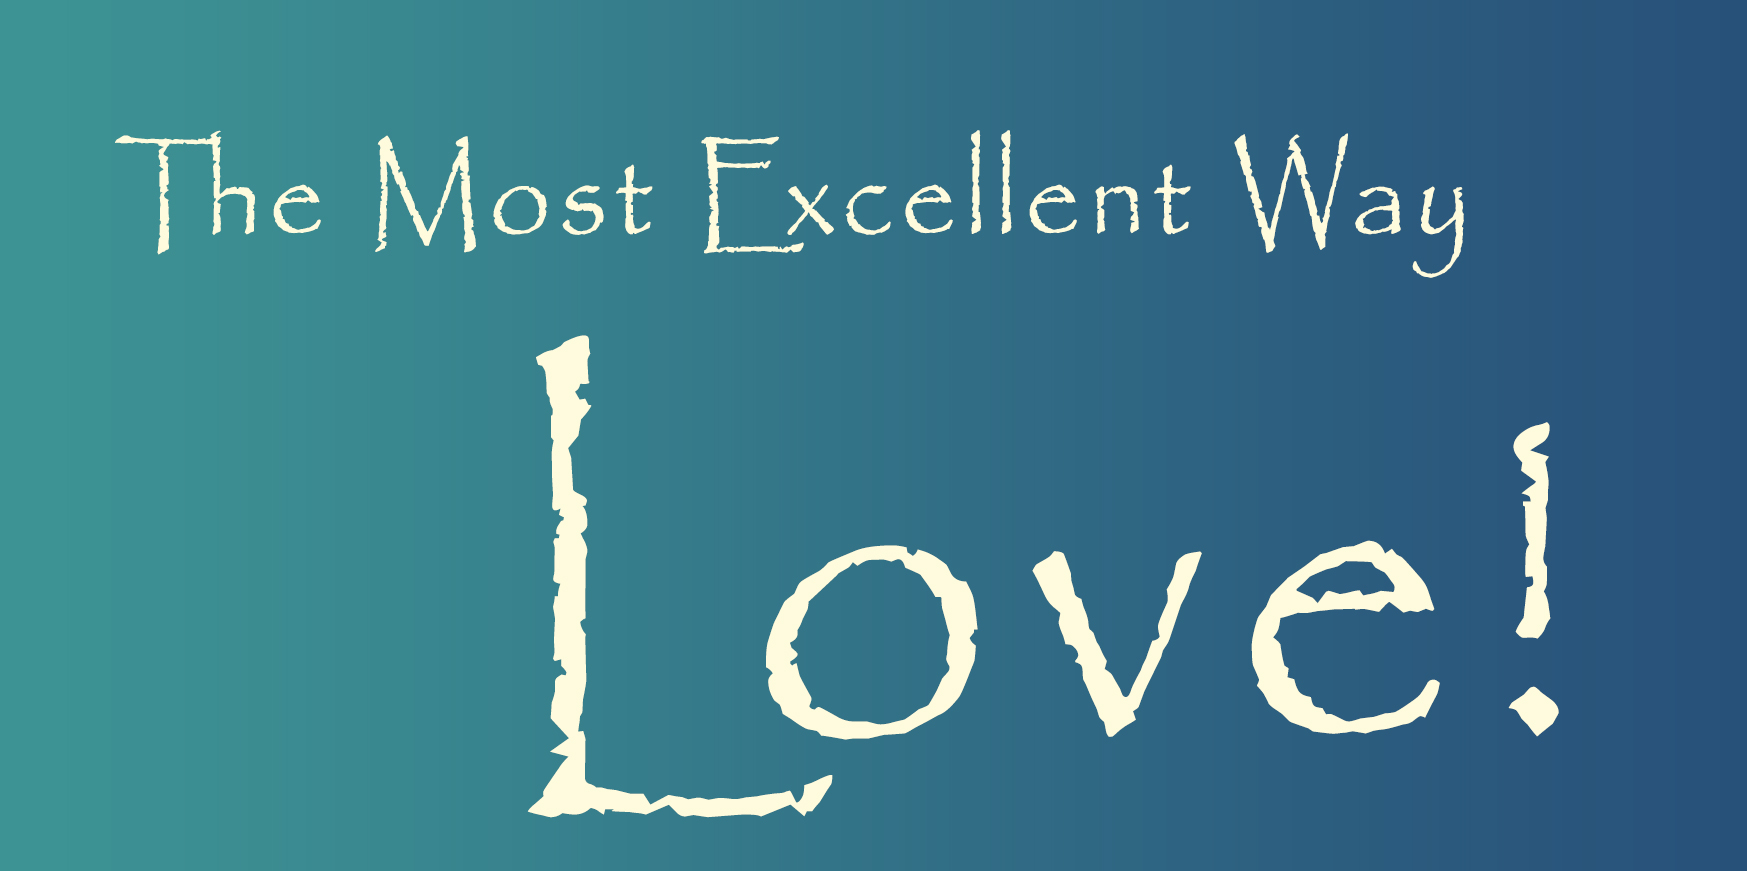 The Most Excellent Way – Love!